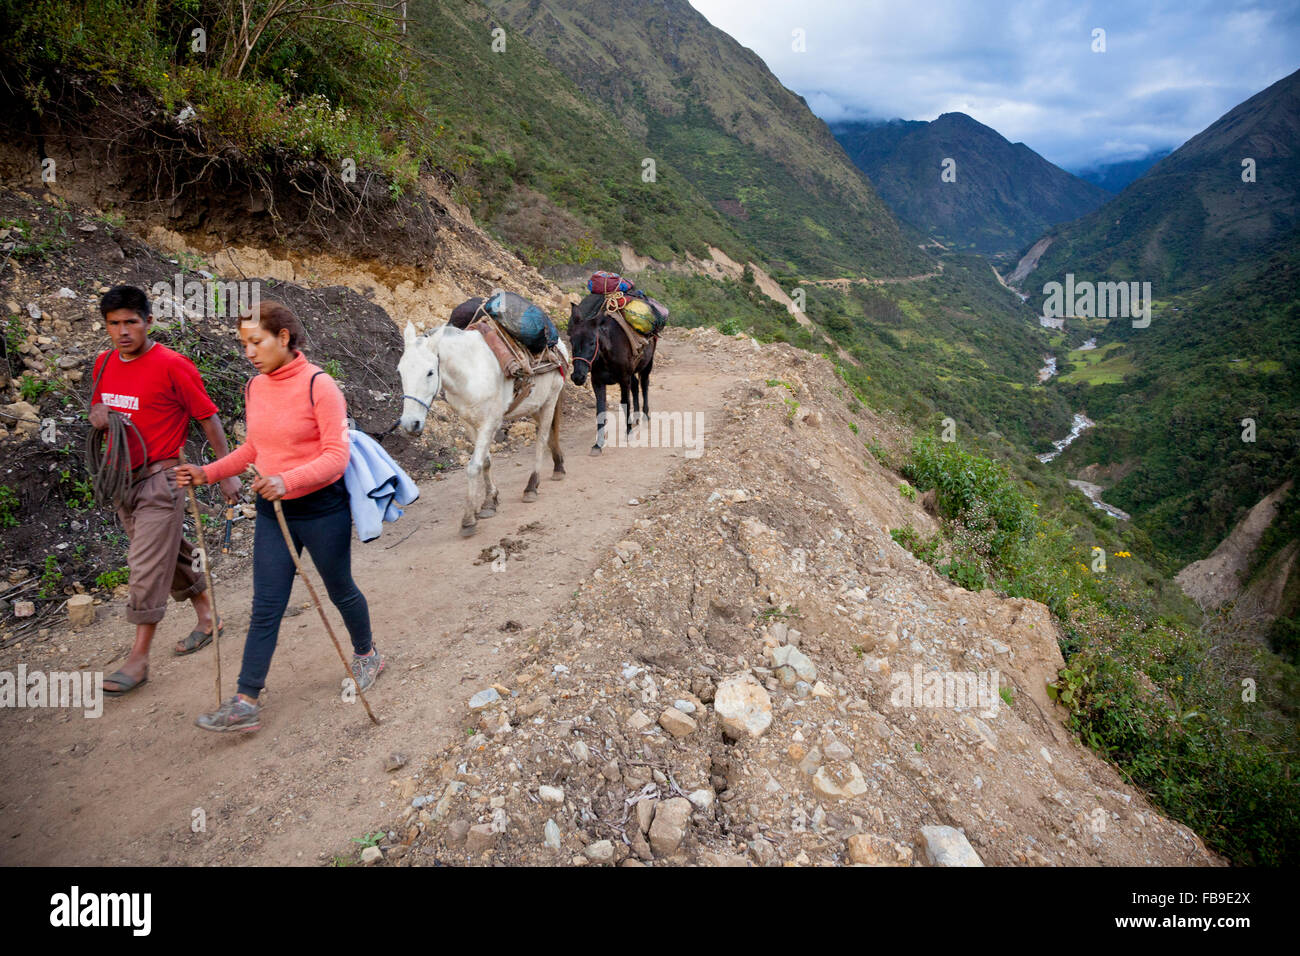 Arriero (muleskinner), pack mules and trek guide on the Choquequirao (Cradle of Gold) Inca Trail, Peru. Stock Photo